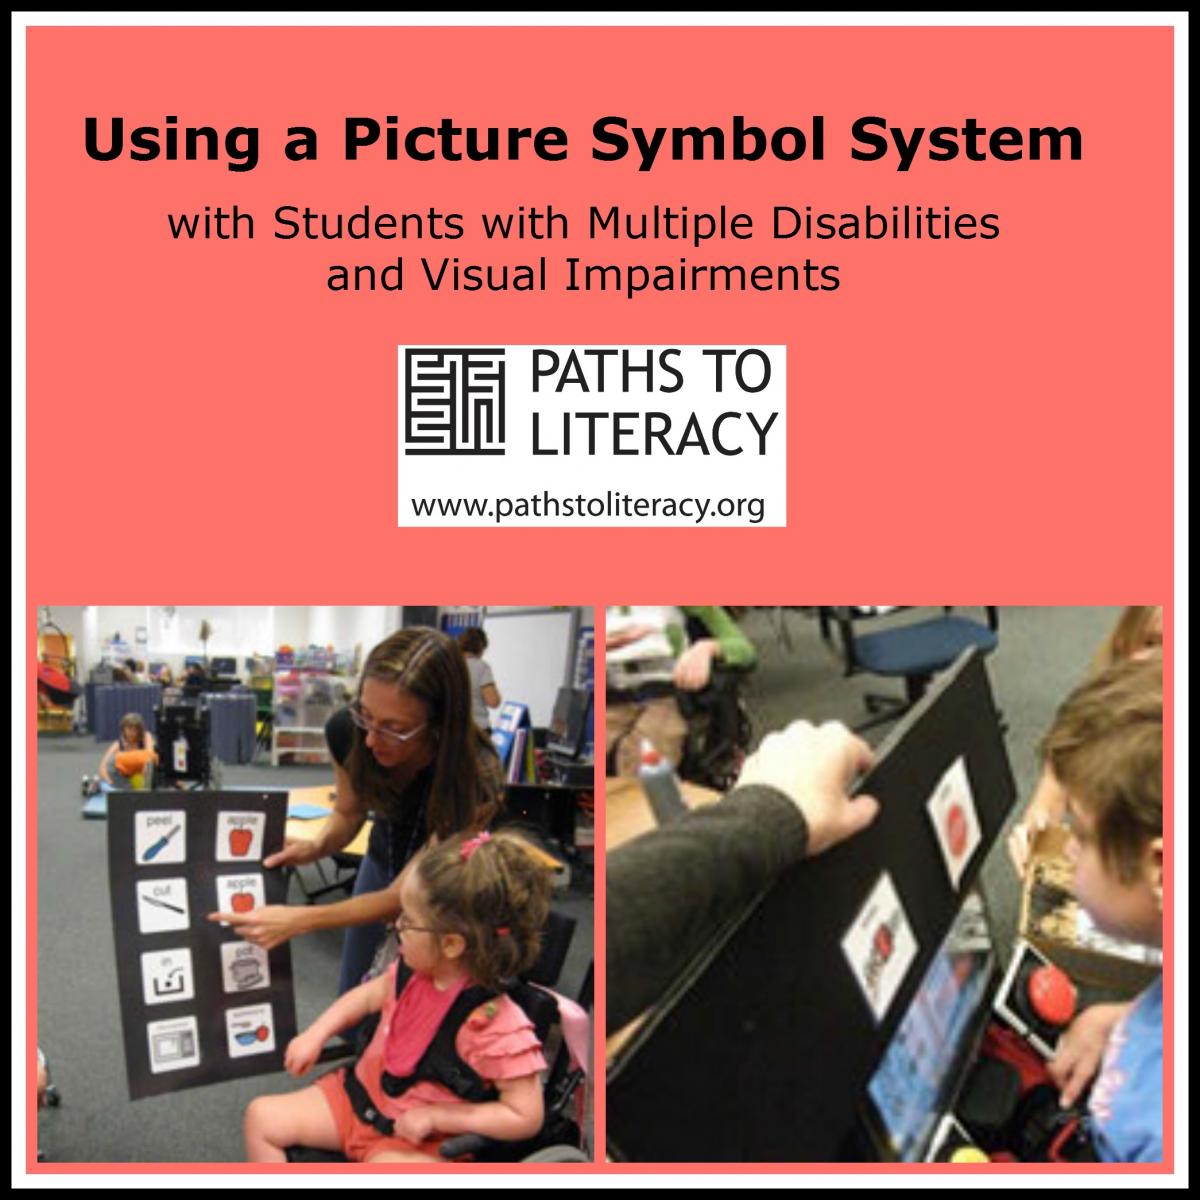 Using a picture symbol system with students with multiple disabilities and visual impairments